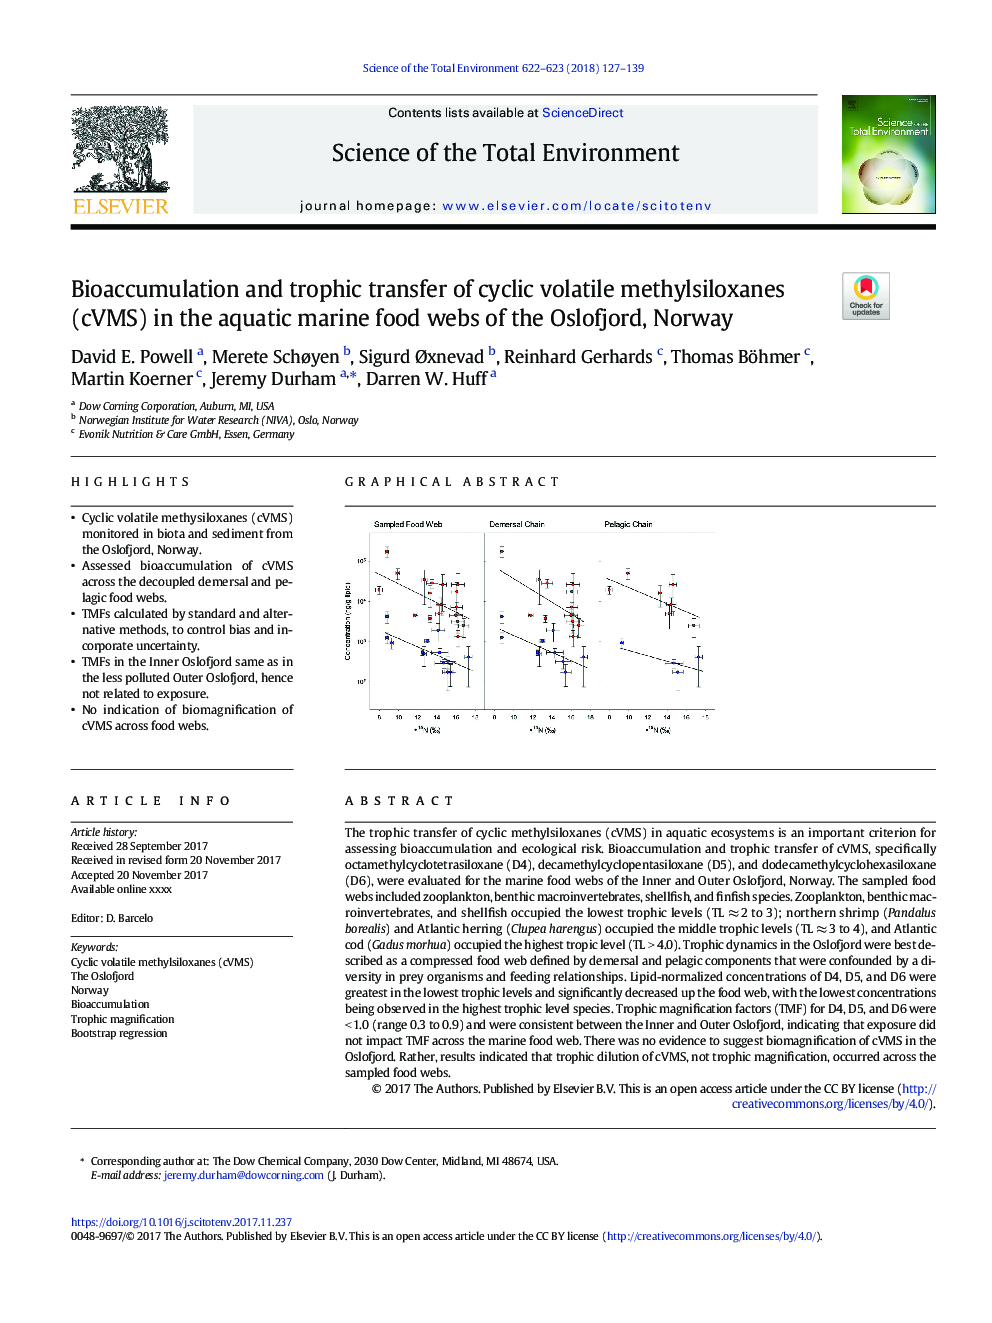 Bioaccumulation and trophic transfer of cyclic volatile methylsiloxanes (cVMS) in the aquatic marine food webs of the Oslofjord, Norway